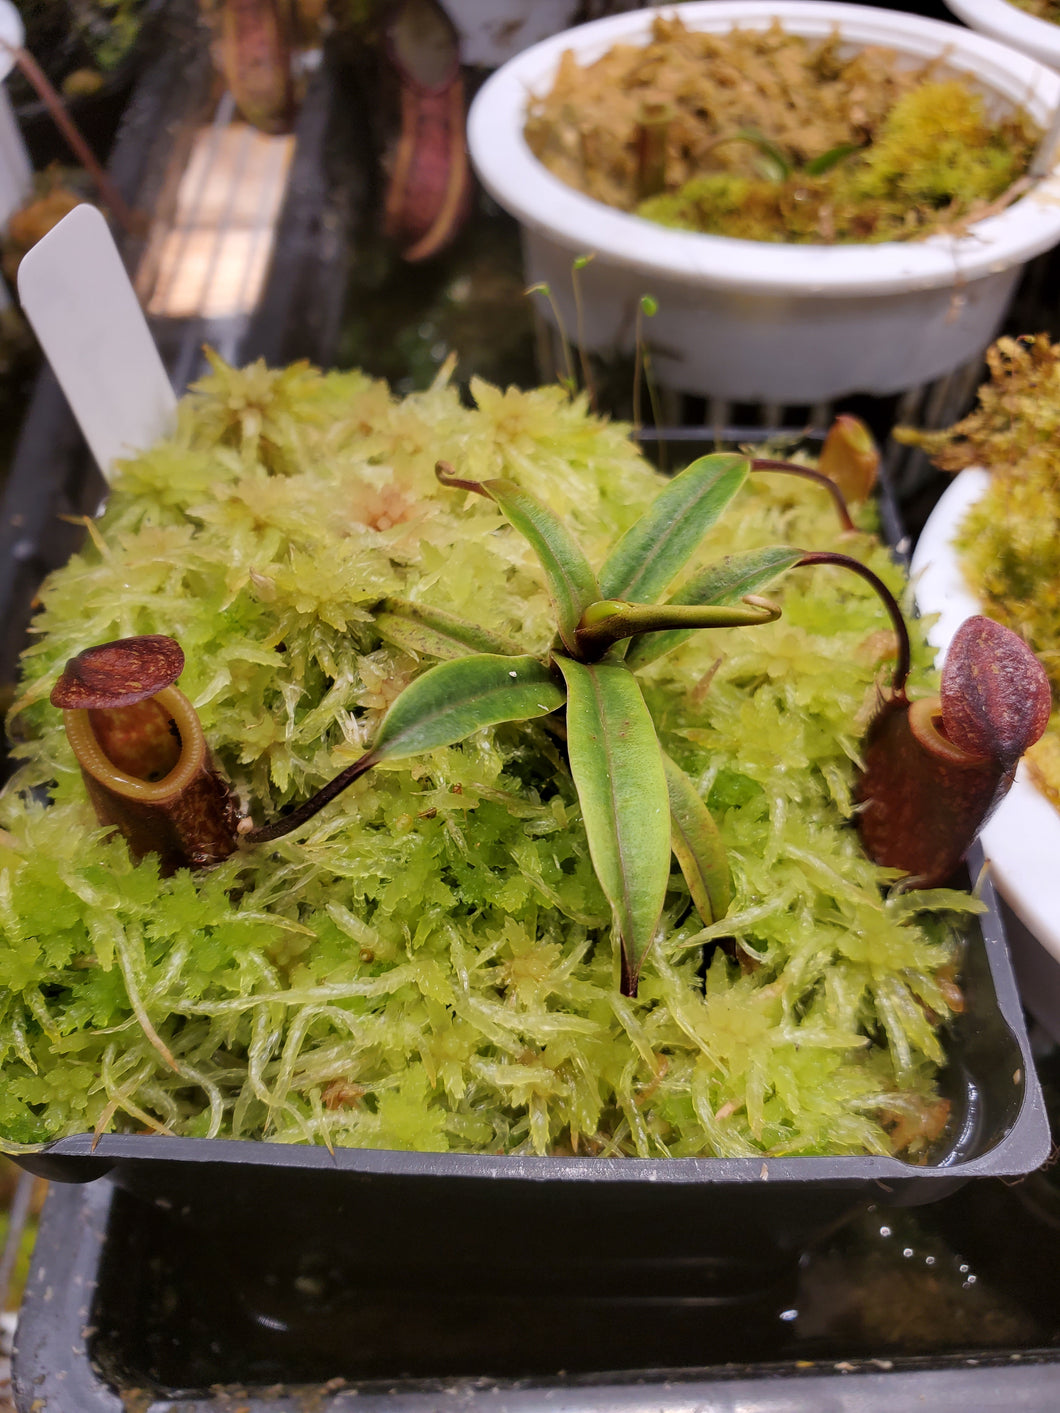 Nepenthes pitopangii!!! Seldom seen in cultivation! Exact plant pictured!